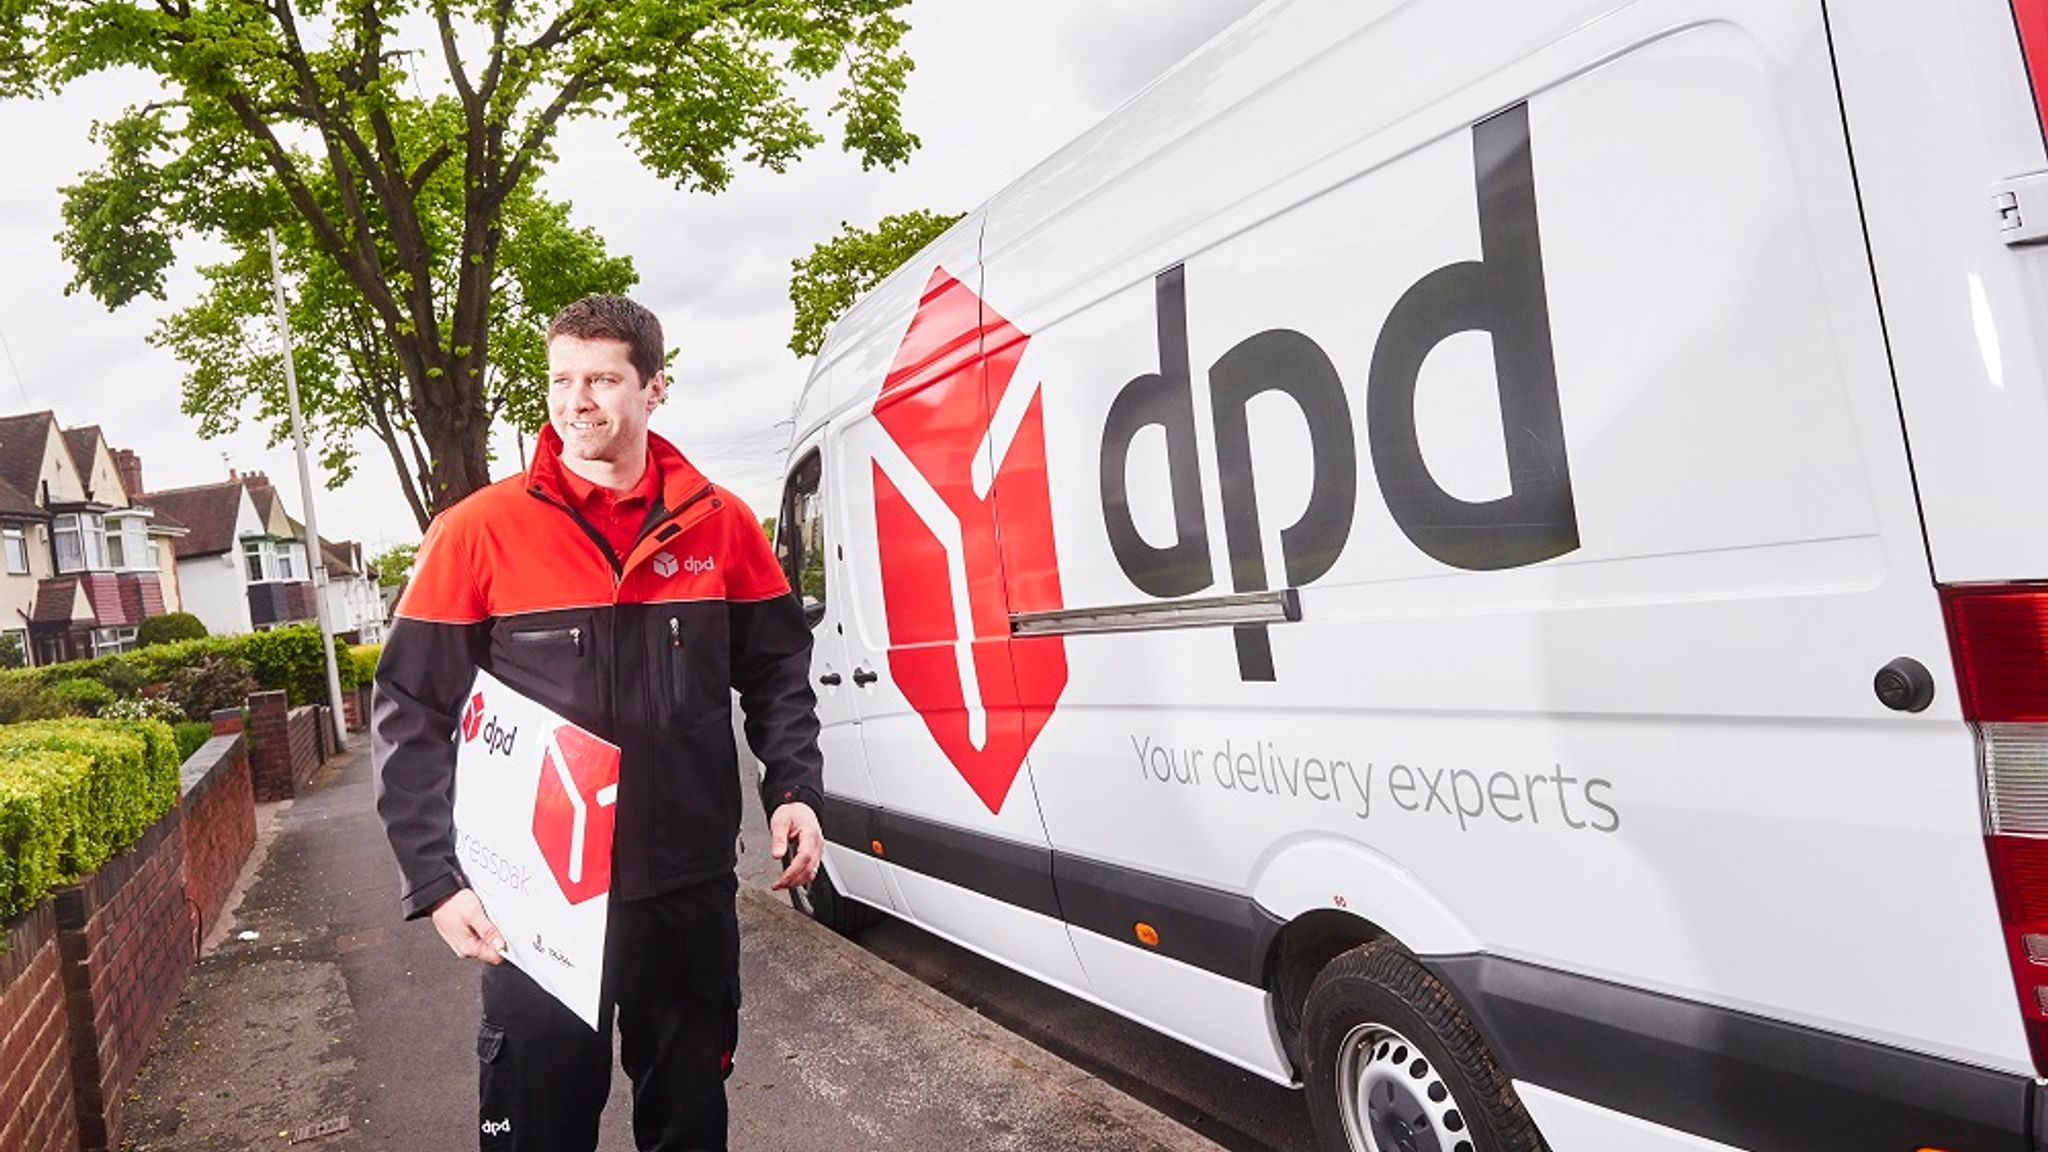 Parcel firm DPD to create 6,000 jobs as 